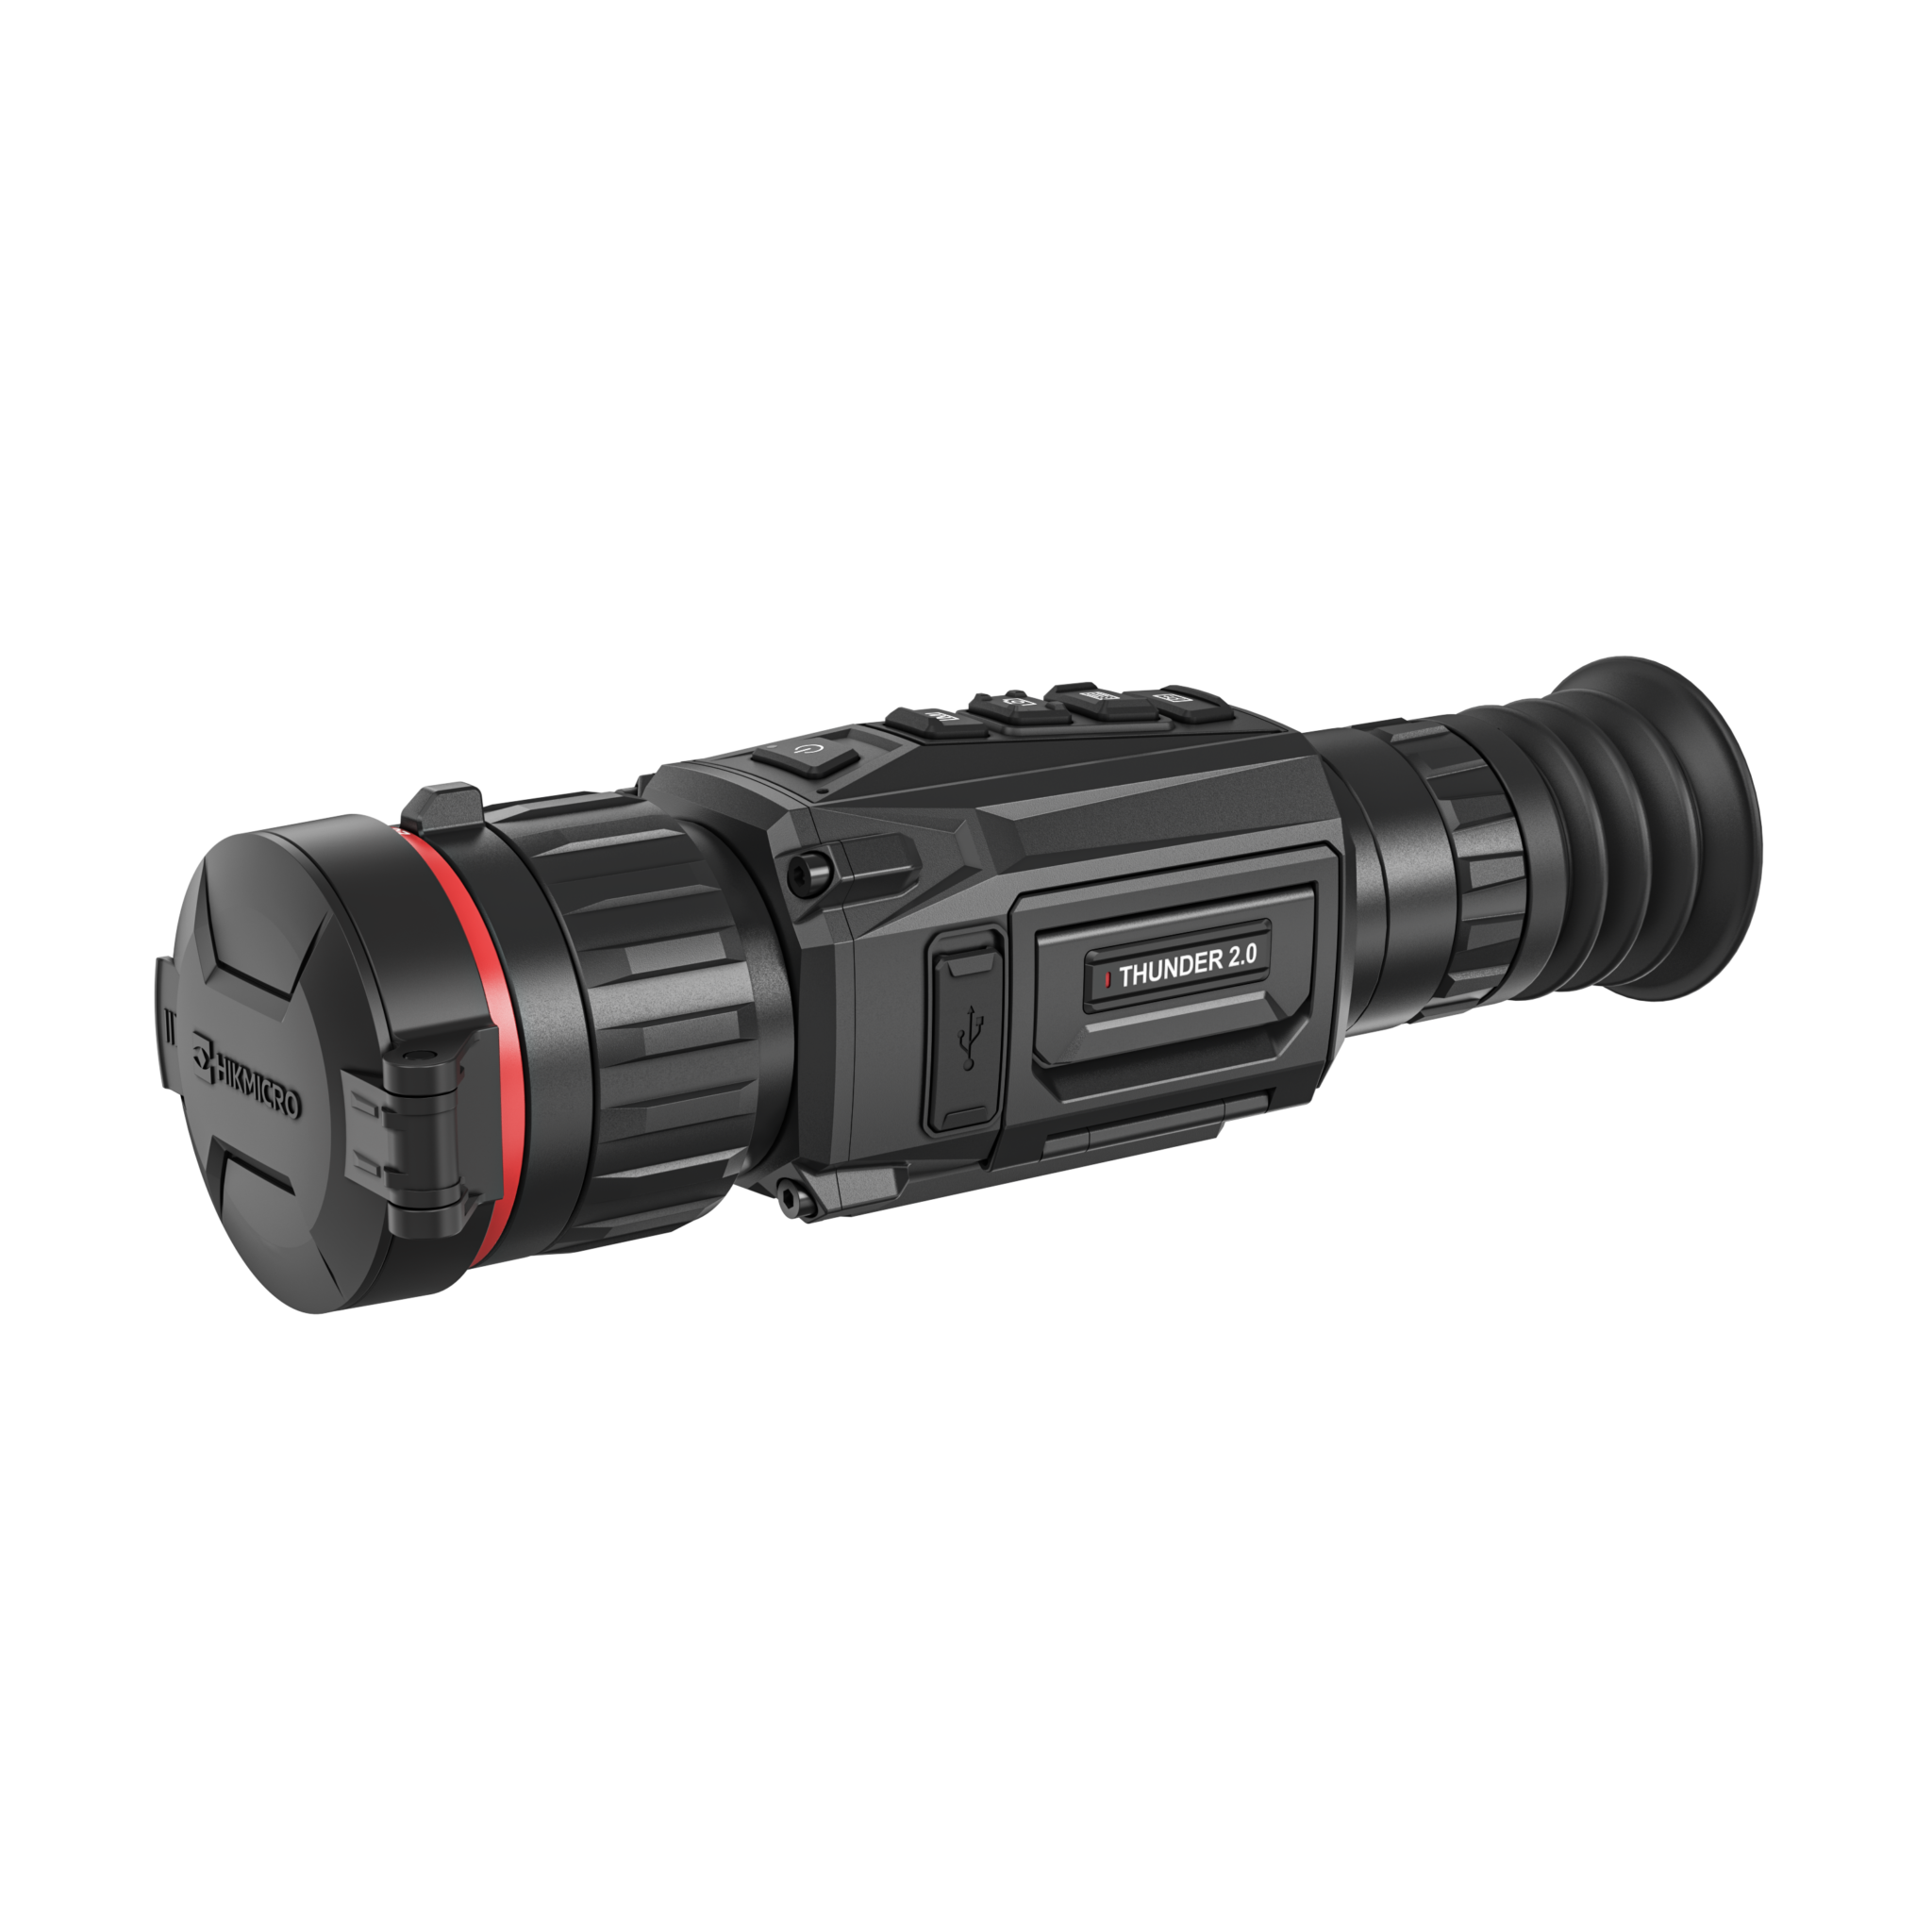 HIKMICRO Thunder 2.0 TH50Z Thermal Scope